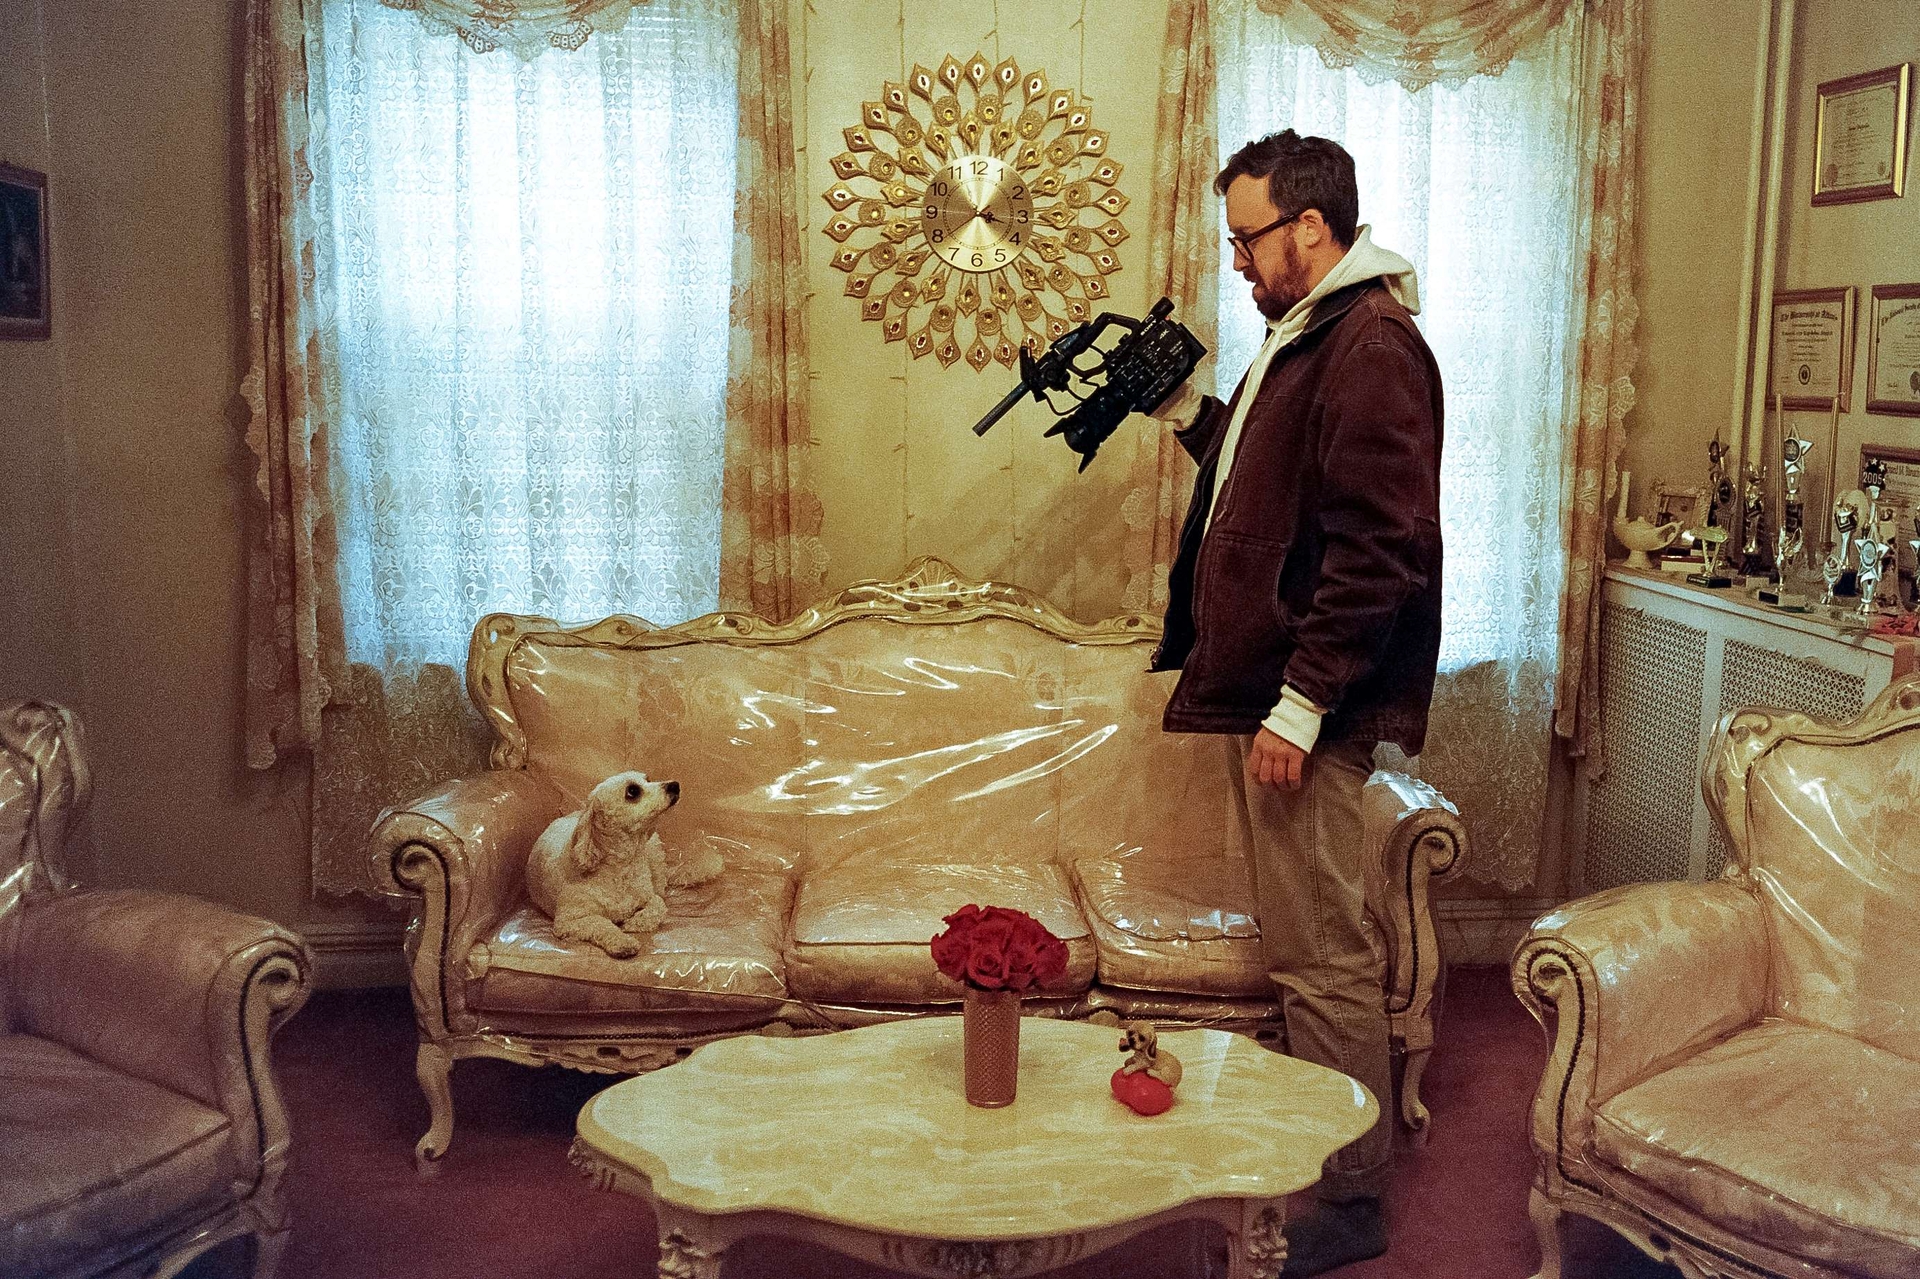 John Wilson stands with a camera filming a dog sitting on nice furniture covered with plastic wrap